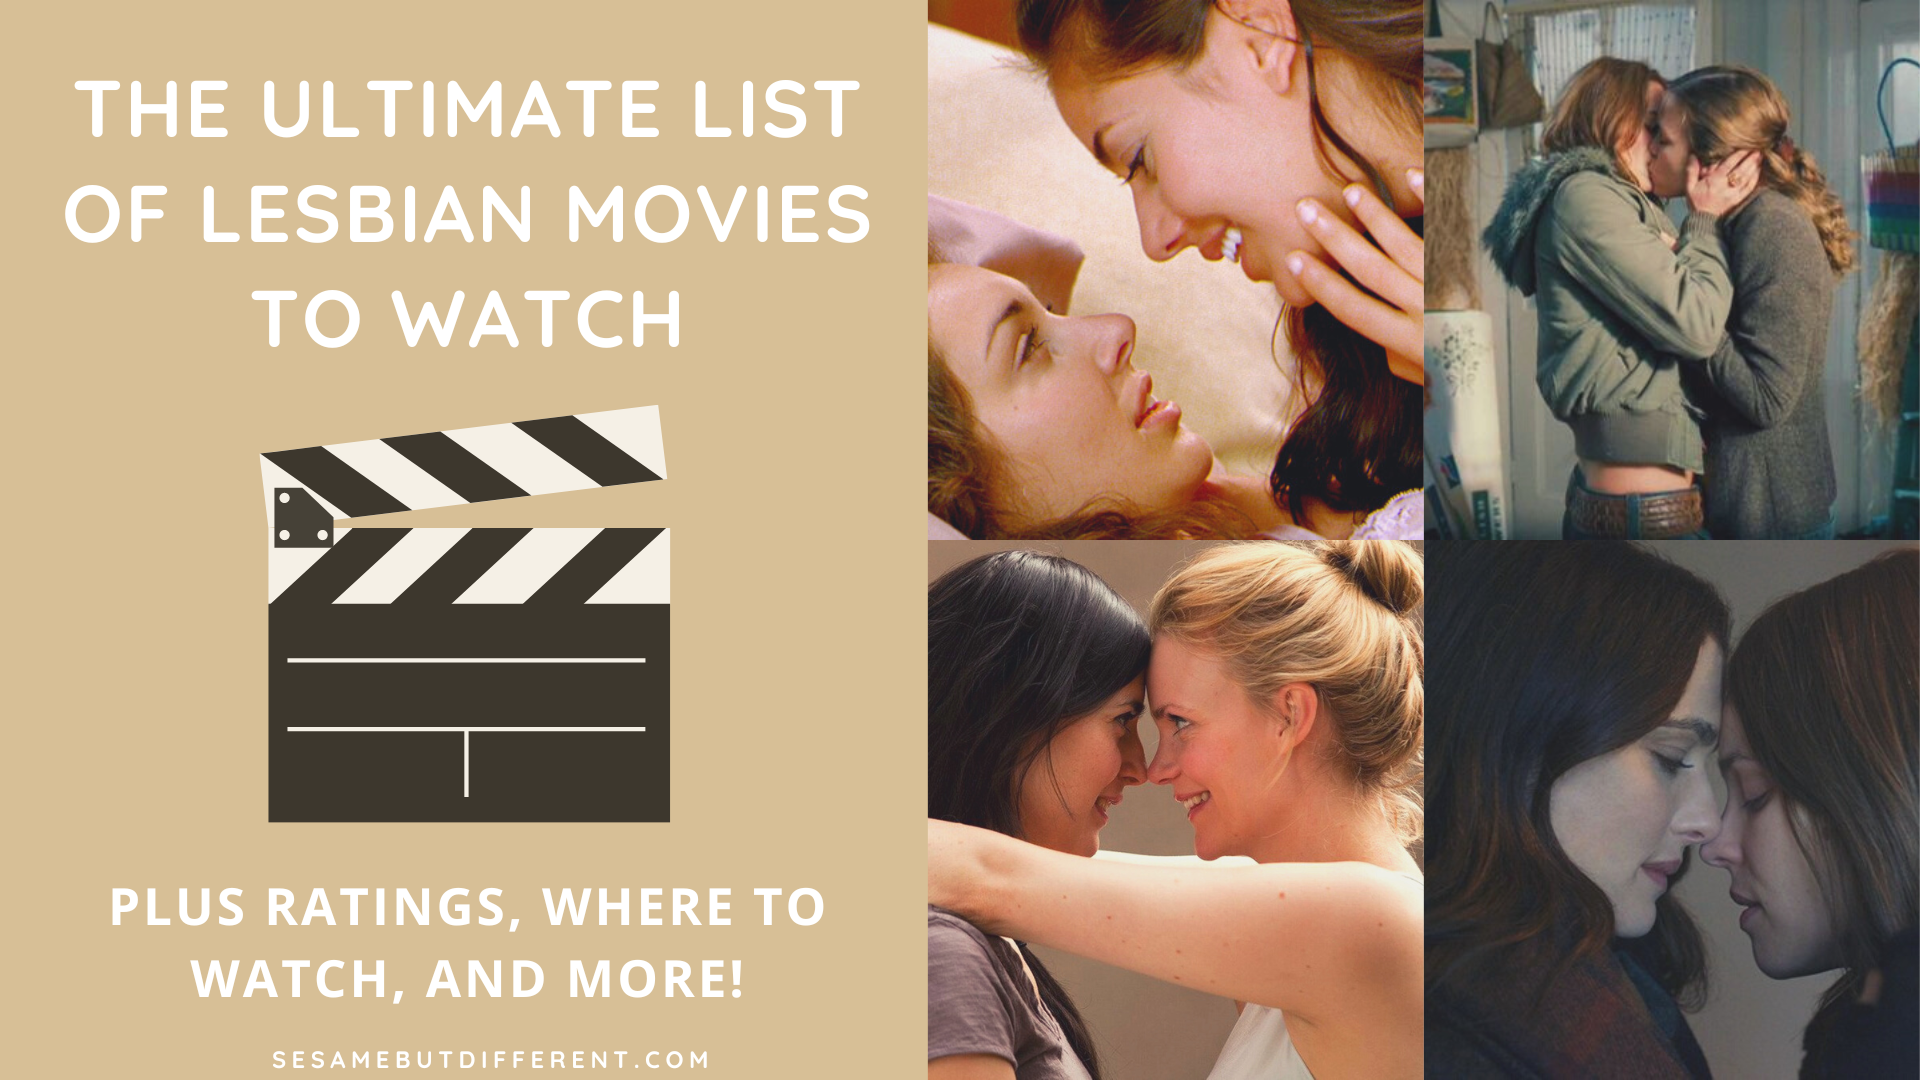 The Ultimate List of Lesbian Movies to Watch